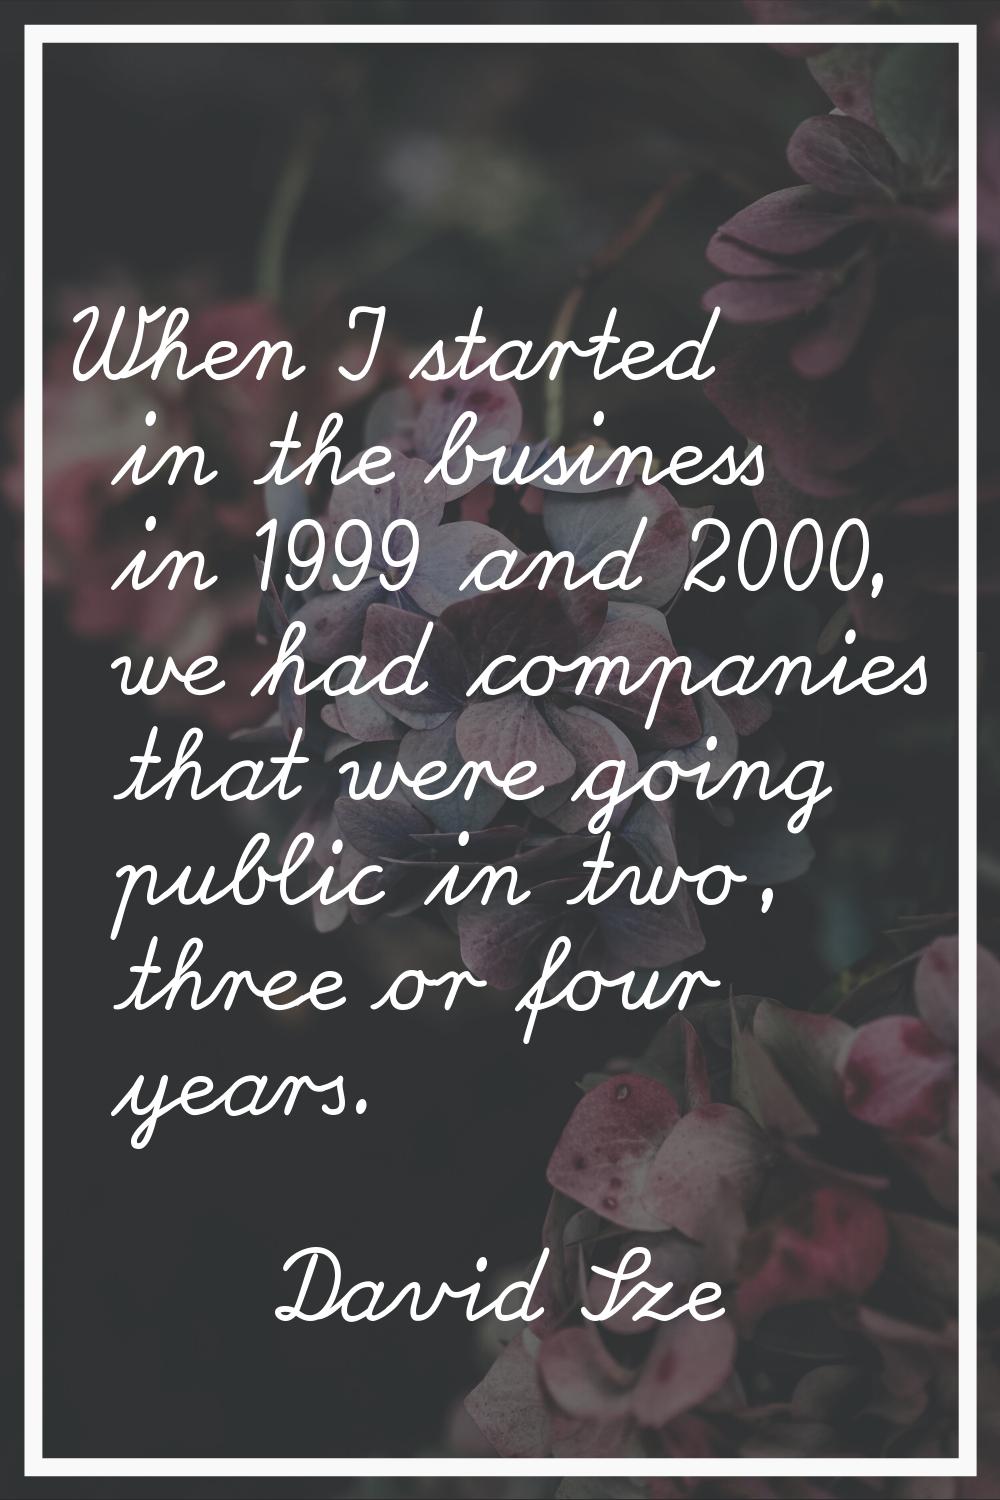 When I started in the business in 1999 and 2000, we had companies that were going public in two, th